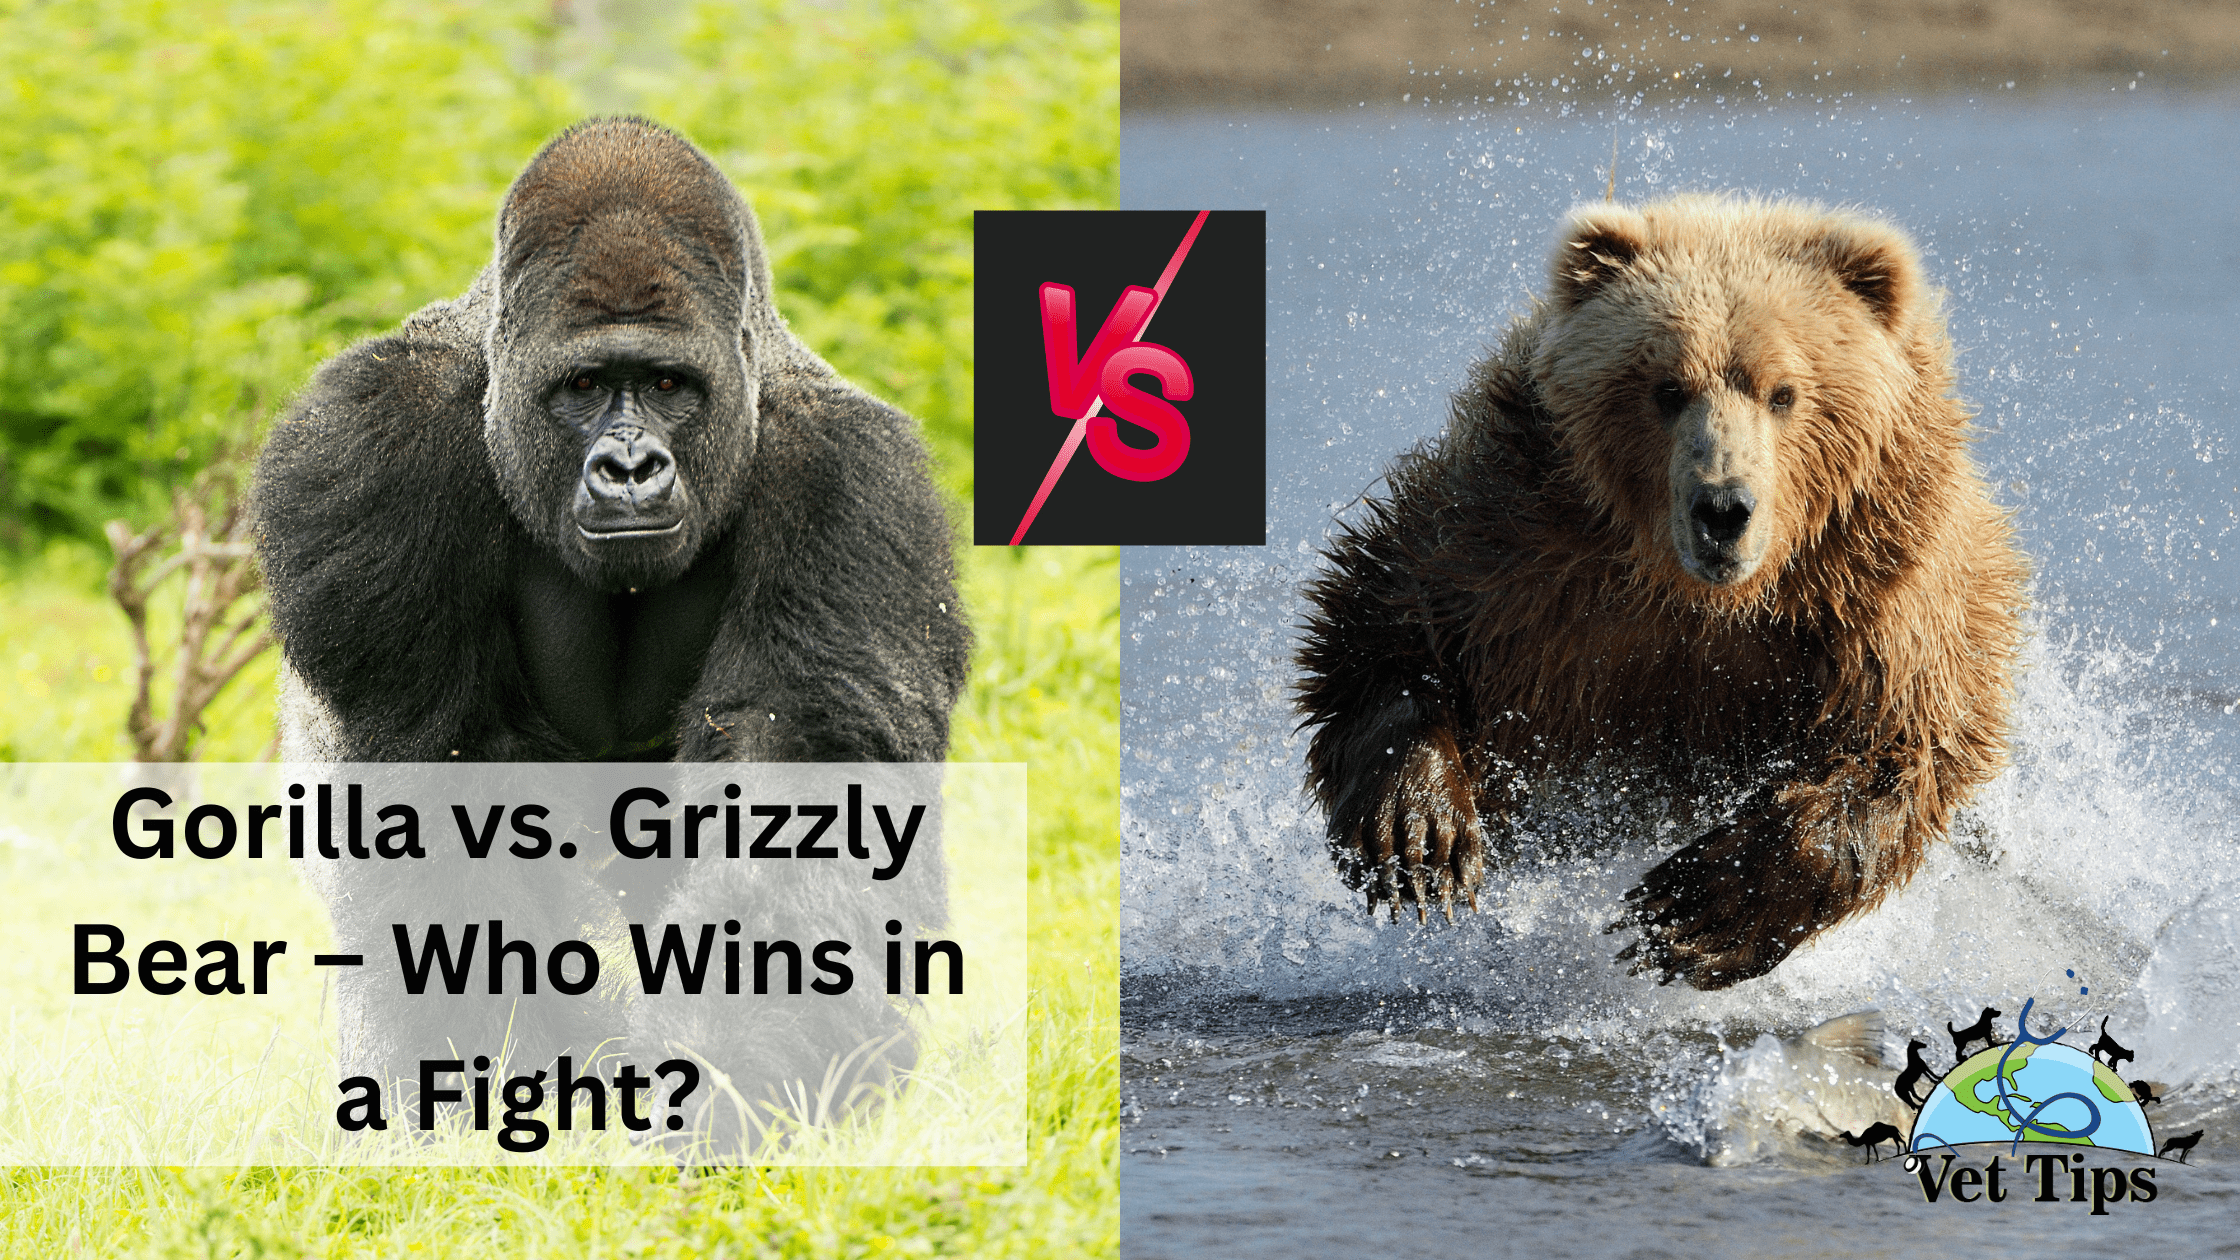 Gorilla vs. Grizzly Bear – Who Wins in a Fight?